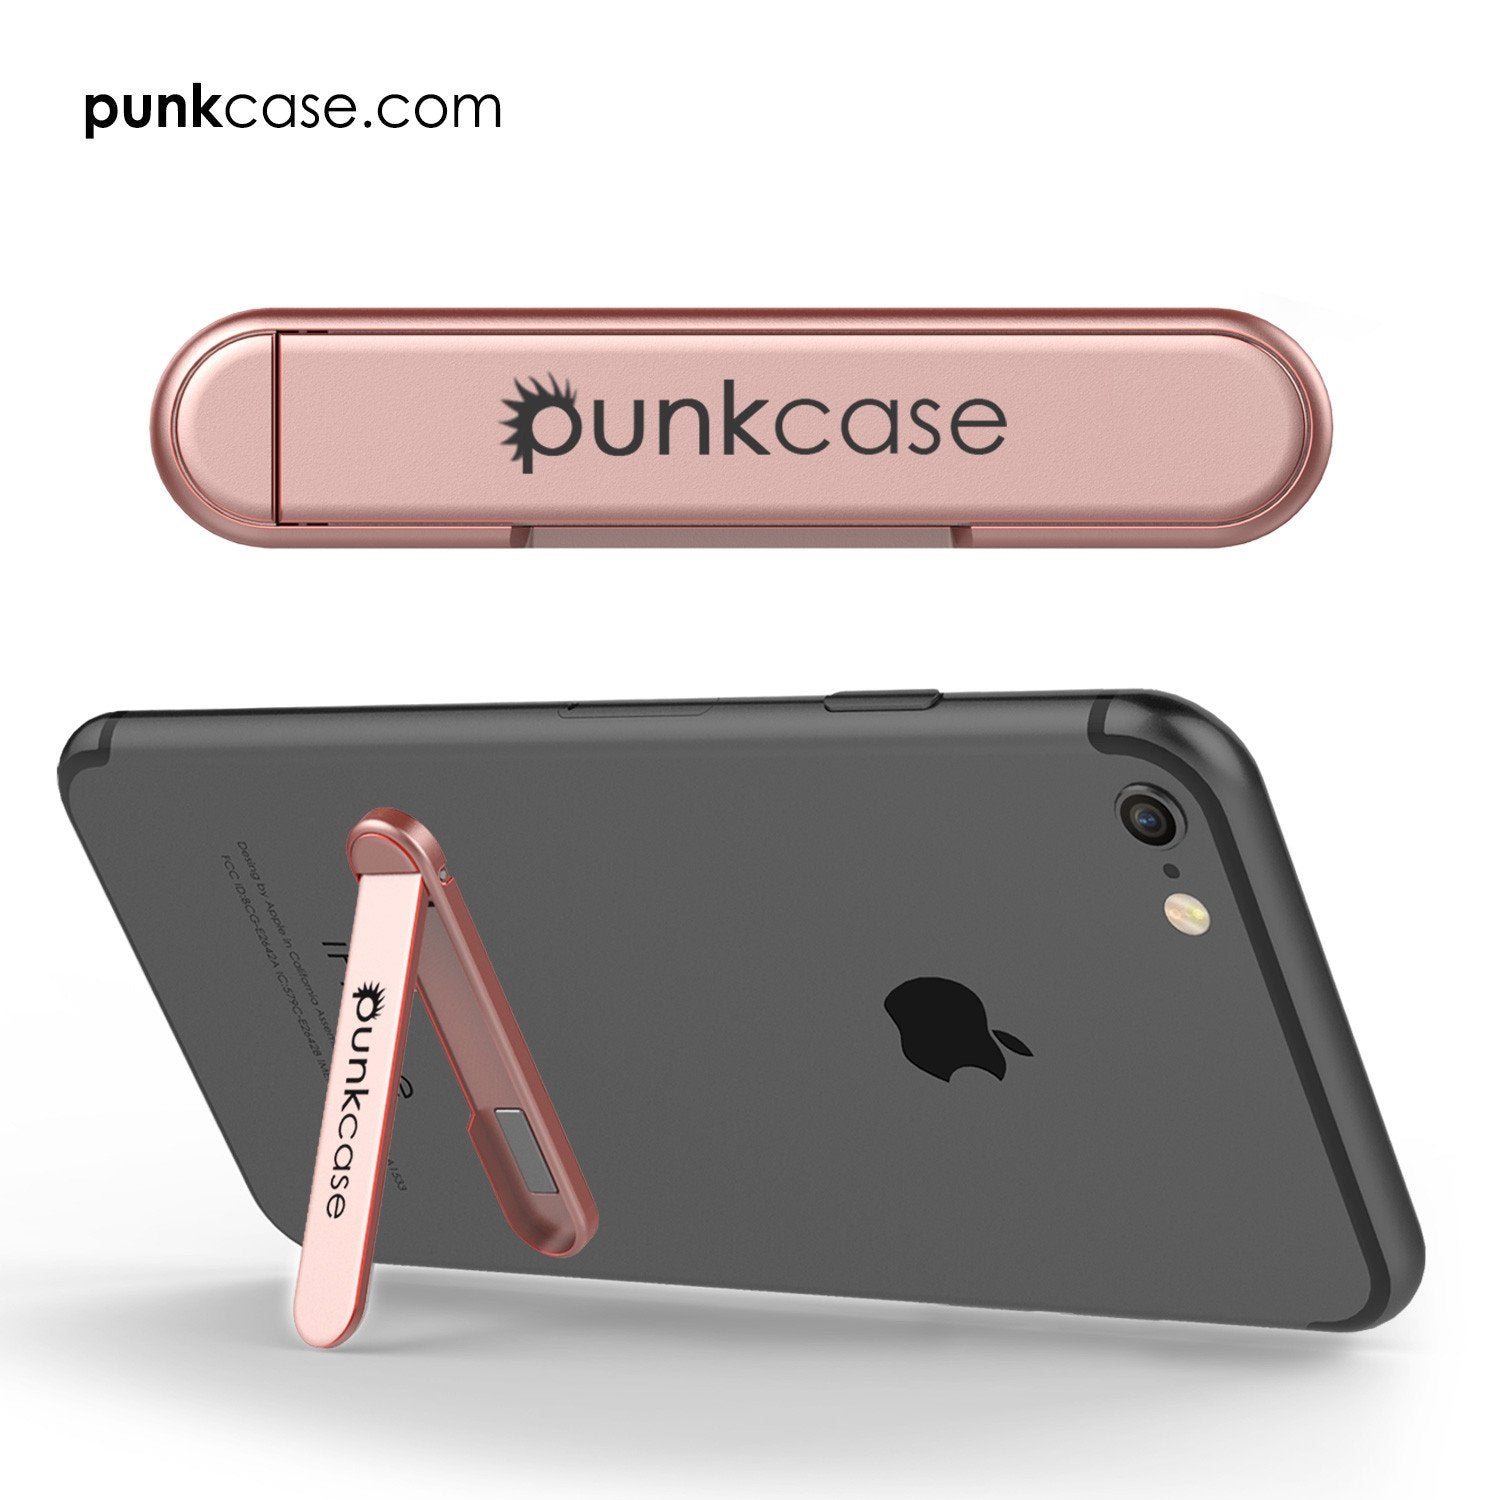 PUNKCASE FlickStick Universal Cell Phone Kickstand for all Mobile Phones & Cases with Flat Backs, One Finger Operation (Rose Gold) - PunkCase NZ